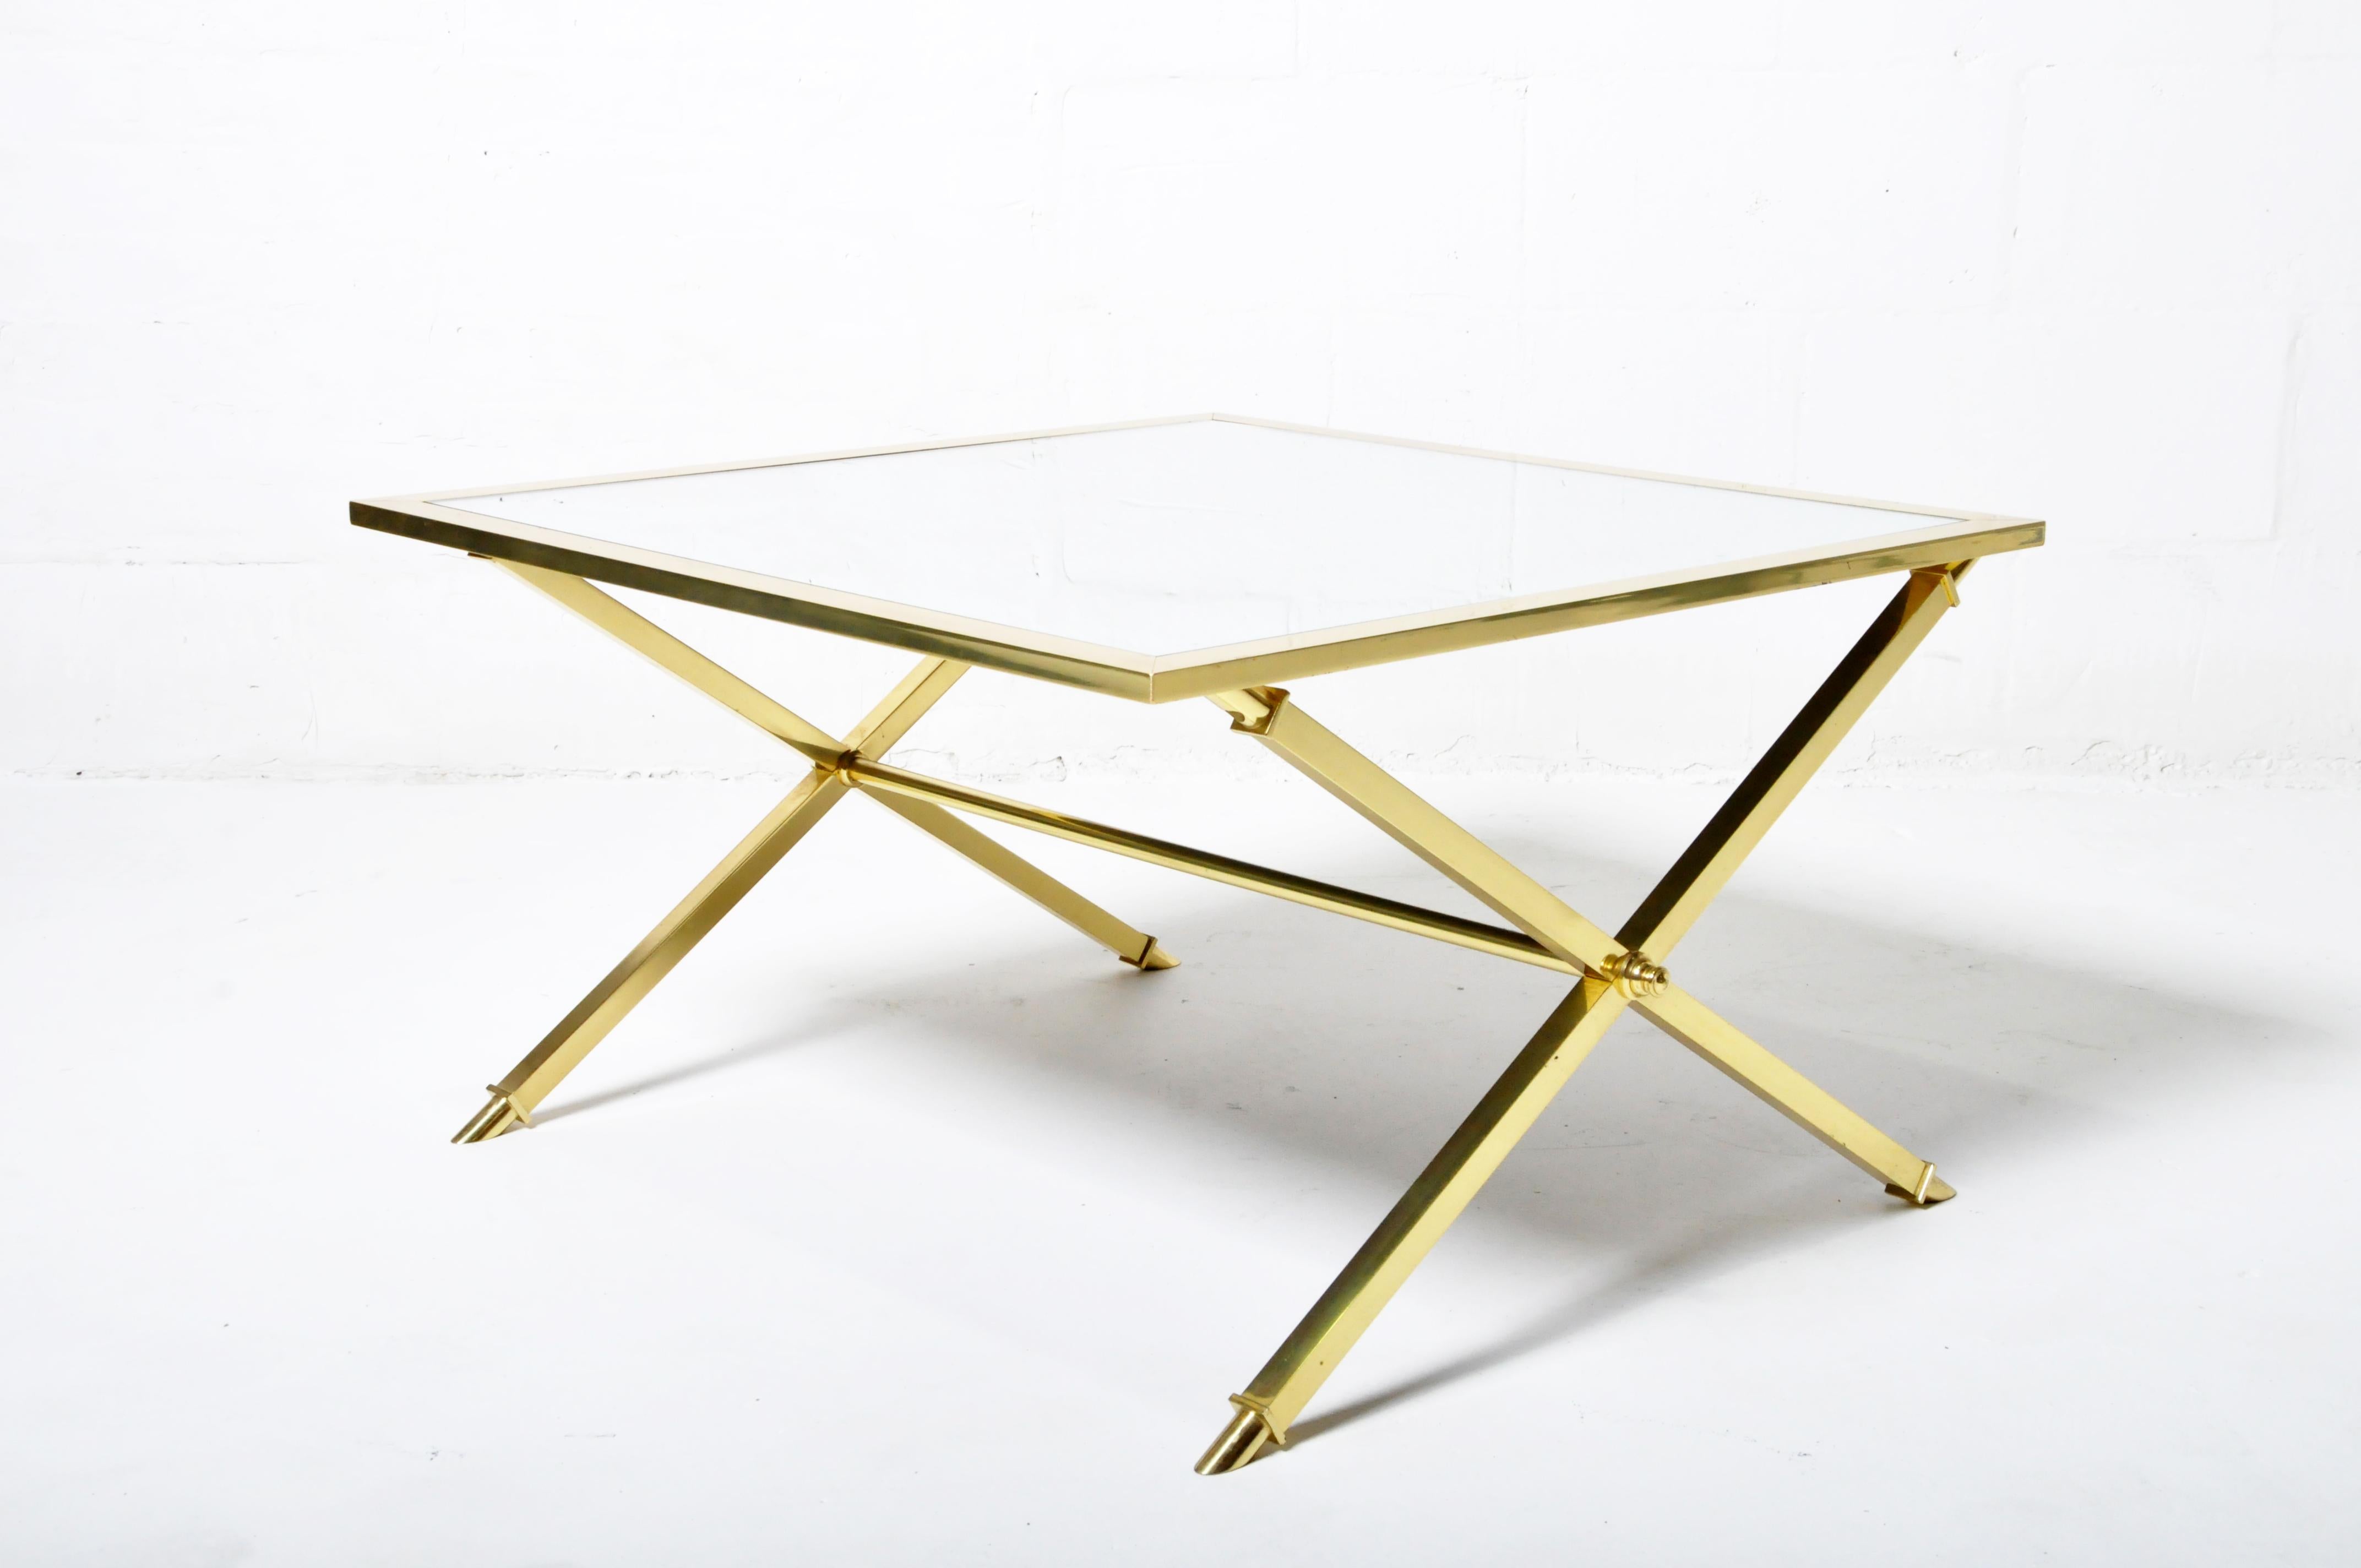 A brass and glass coffee table newly made a according to an Italian mid-century design.